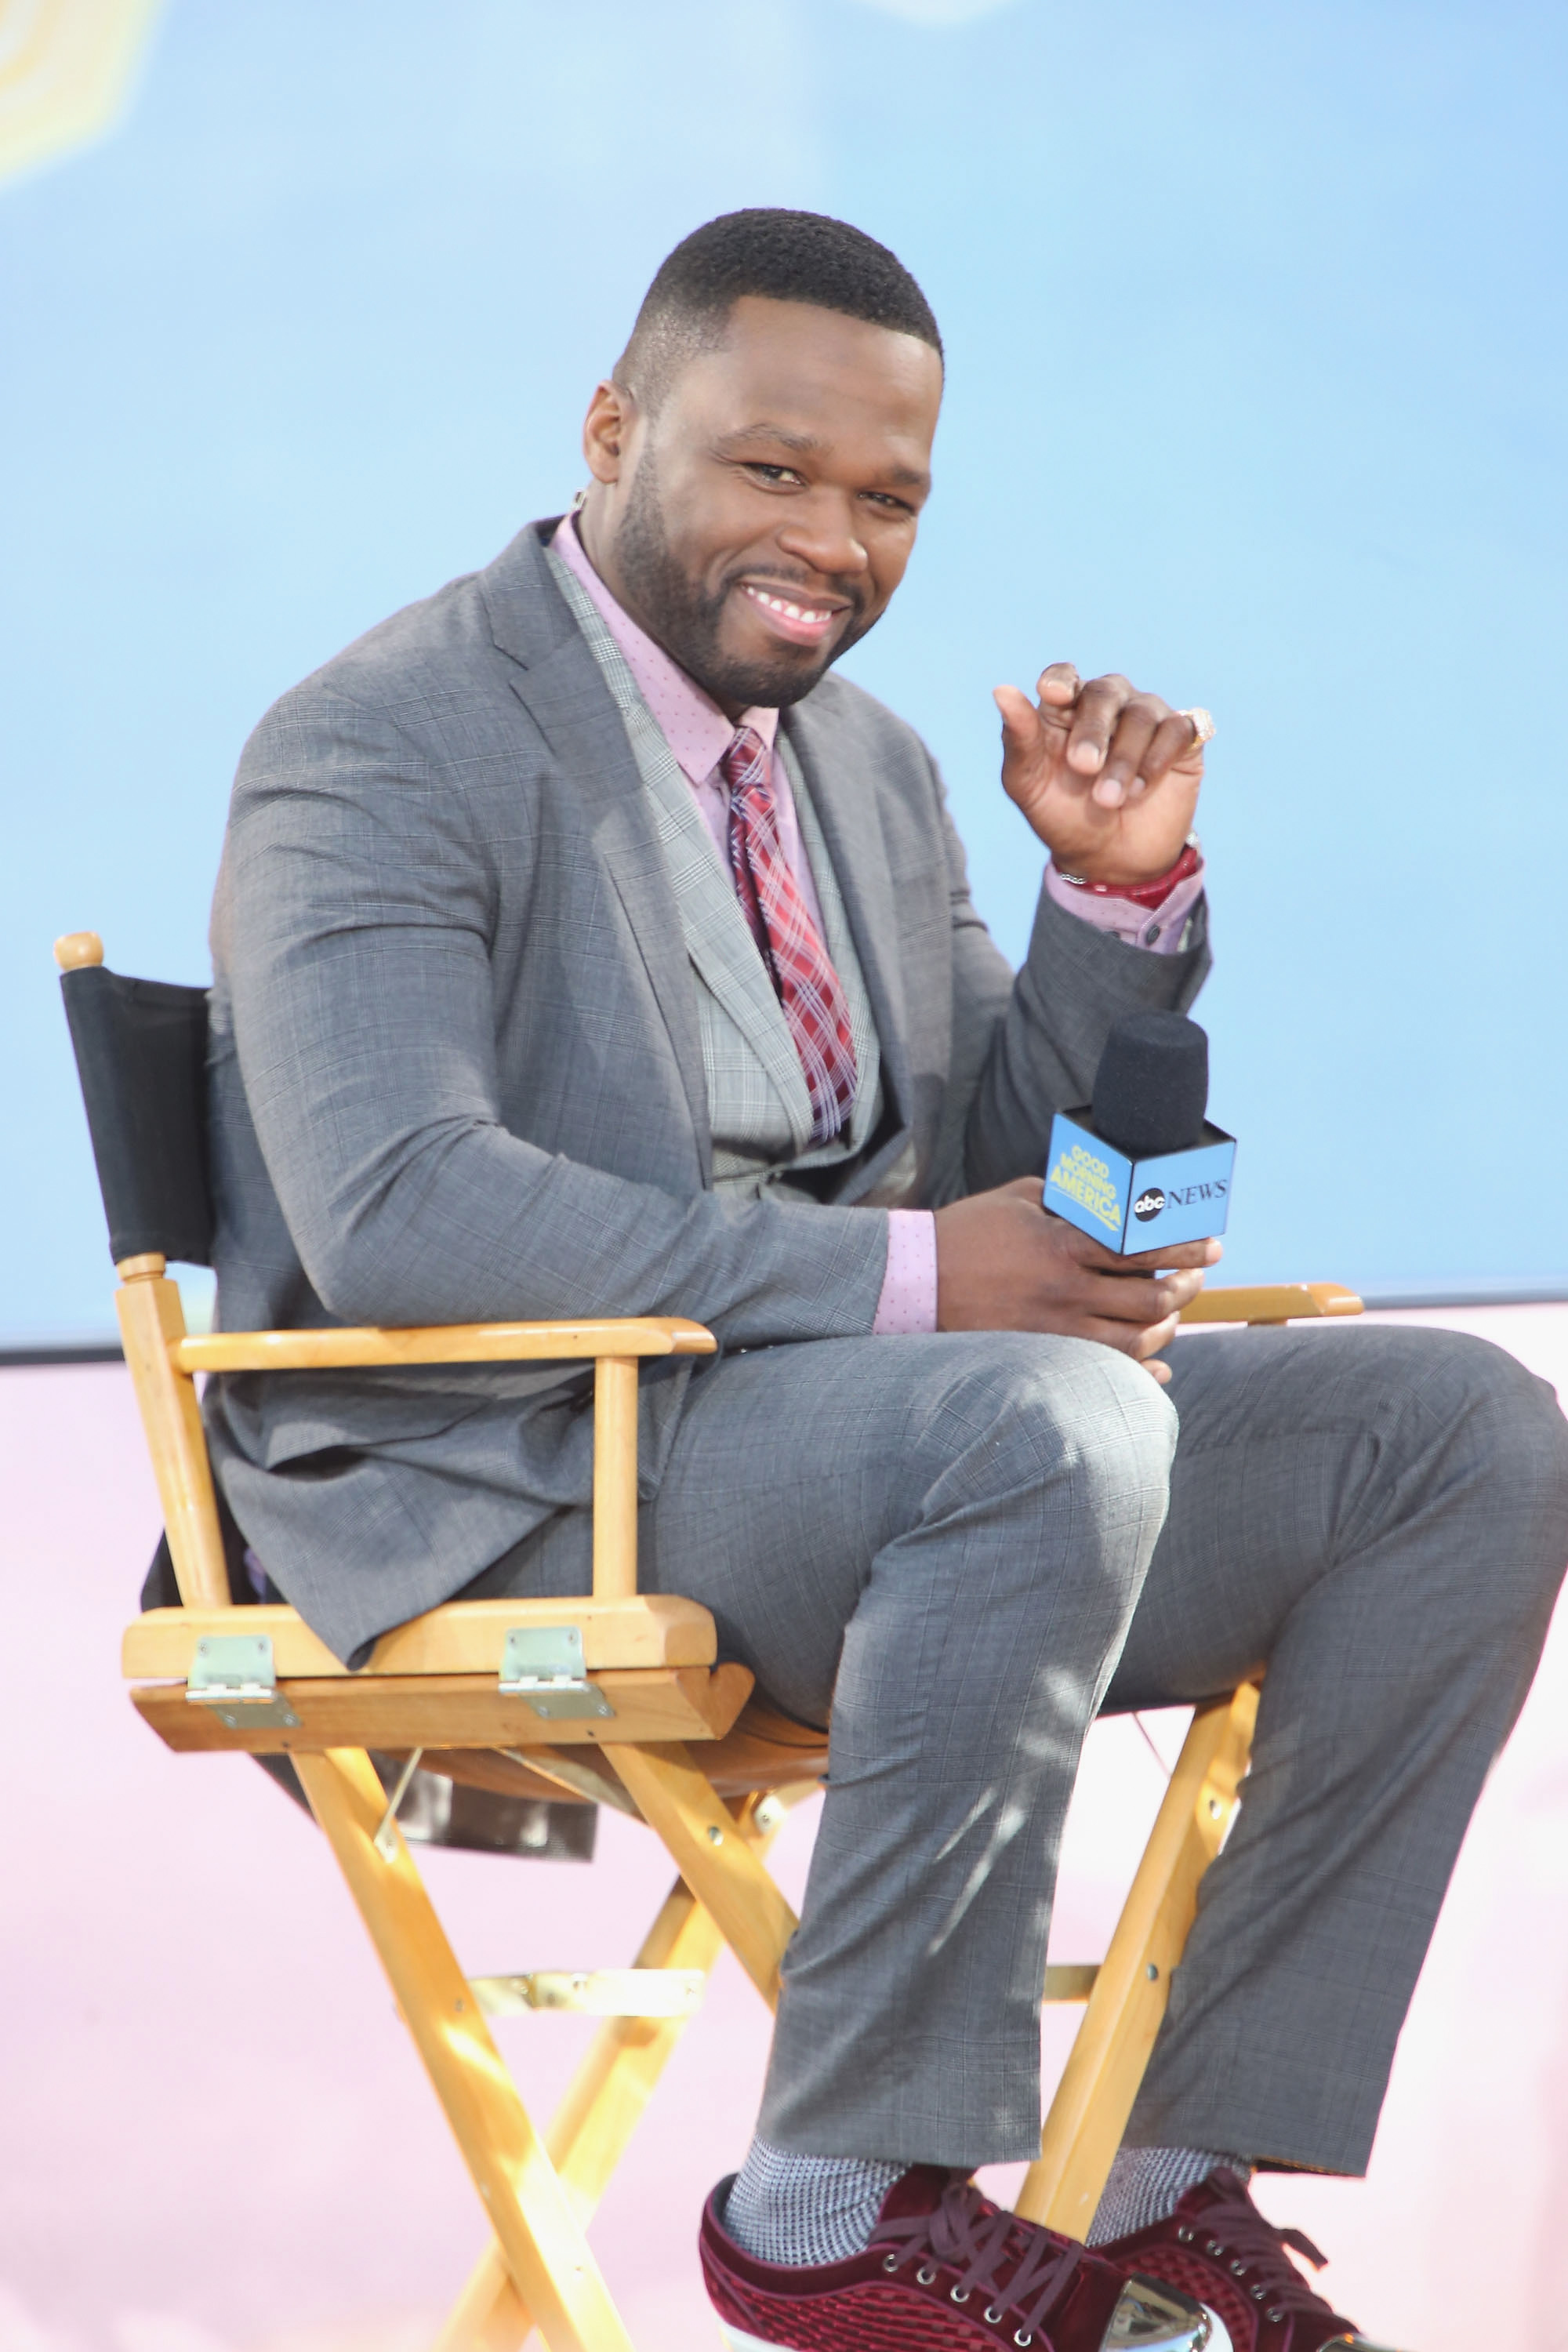 Curtis "50 Cent" Jackson is interviewed by ABC's "Good Morning America" host  on "Good Morning America" at Rumsey Playfield, Central Park on July 24, 2015 in New York City. (Al Pereira&mdash;WireImage/Getty Images)